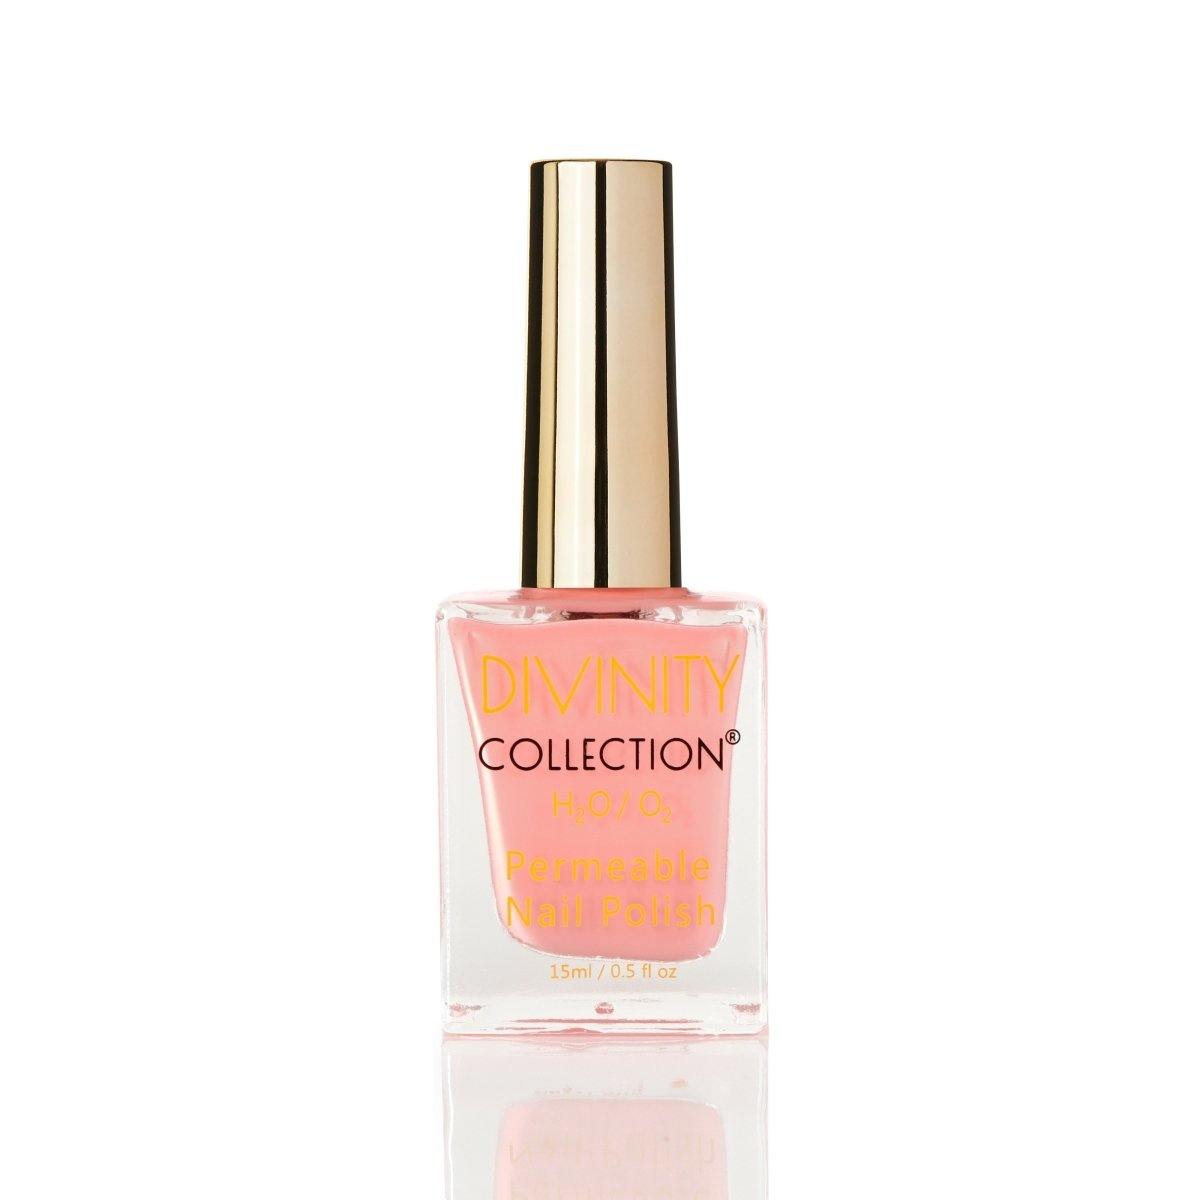 Divinity Collection Permeable Halal Nail Polish - Coral - Divinity Collection